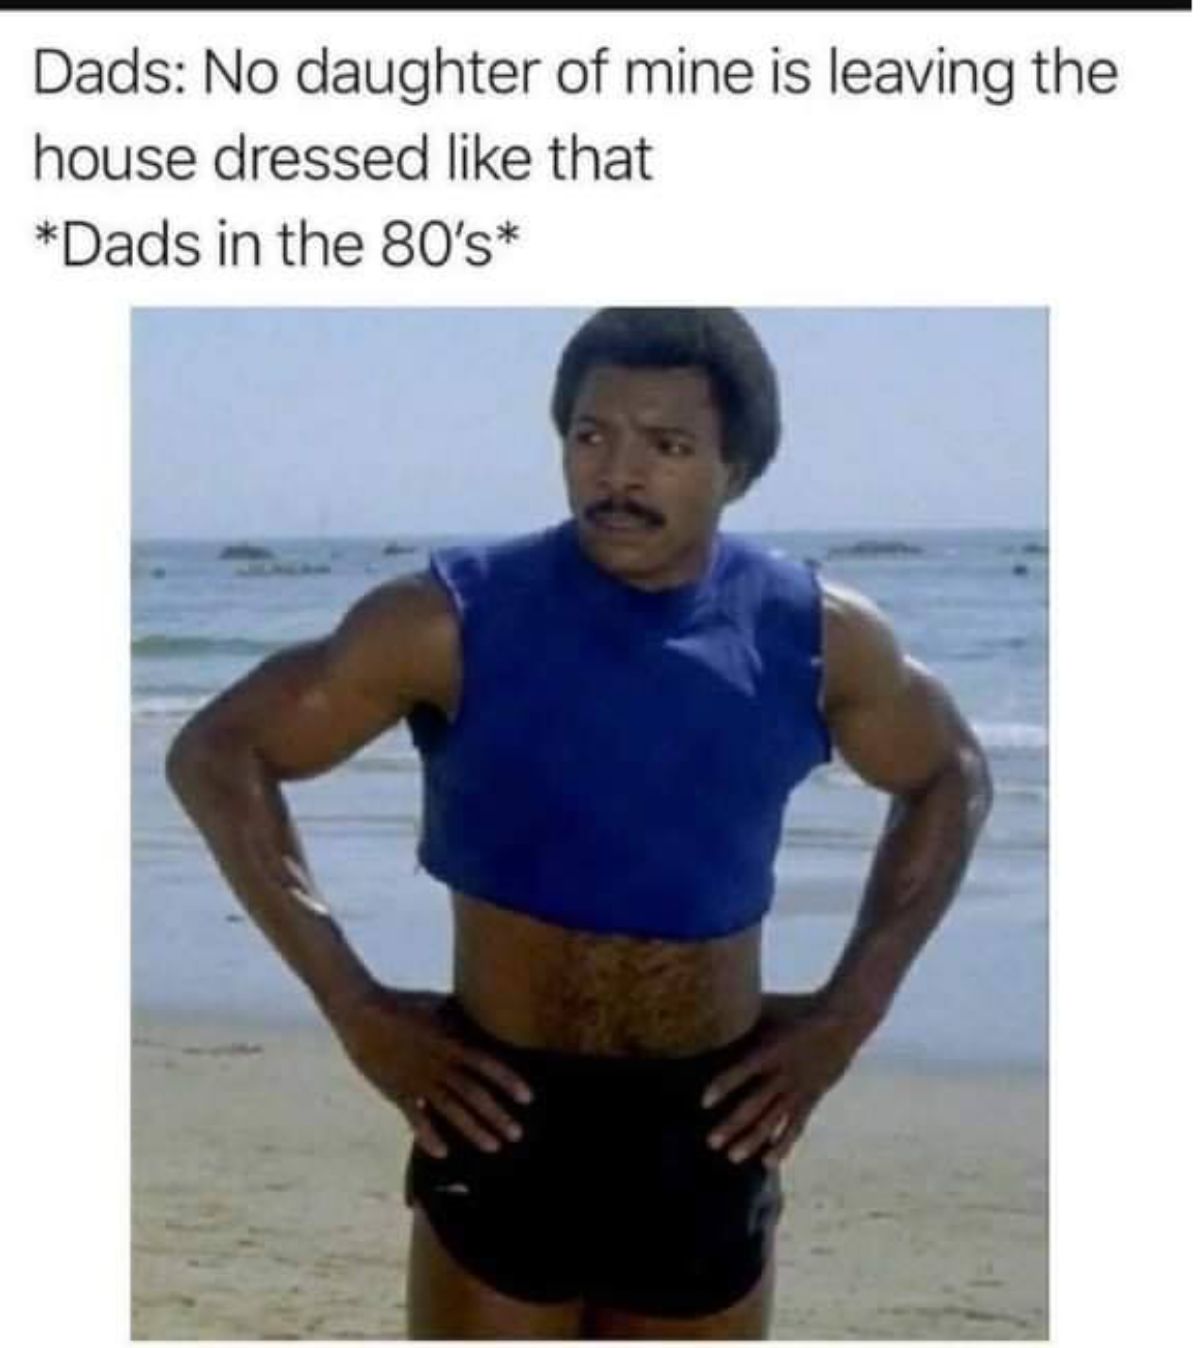 apollo creed cropped - Dads No daughter of mine is leaving the house dressed that Dads in the 80's